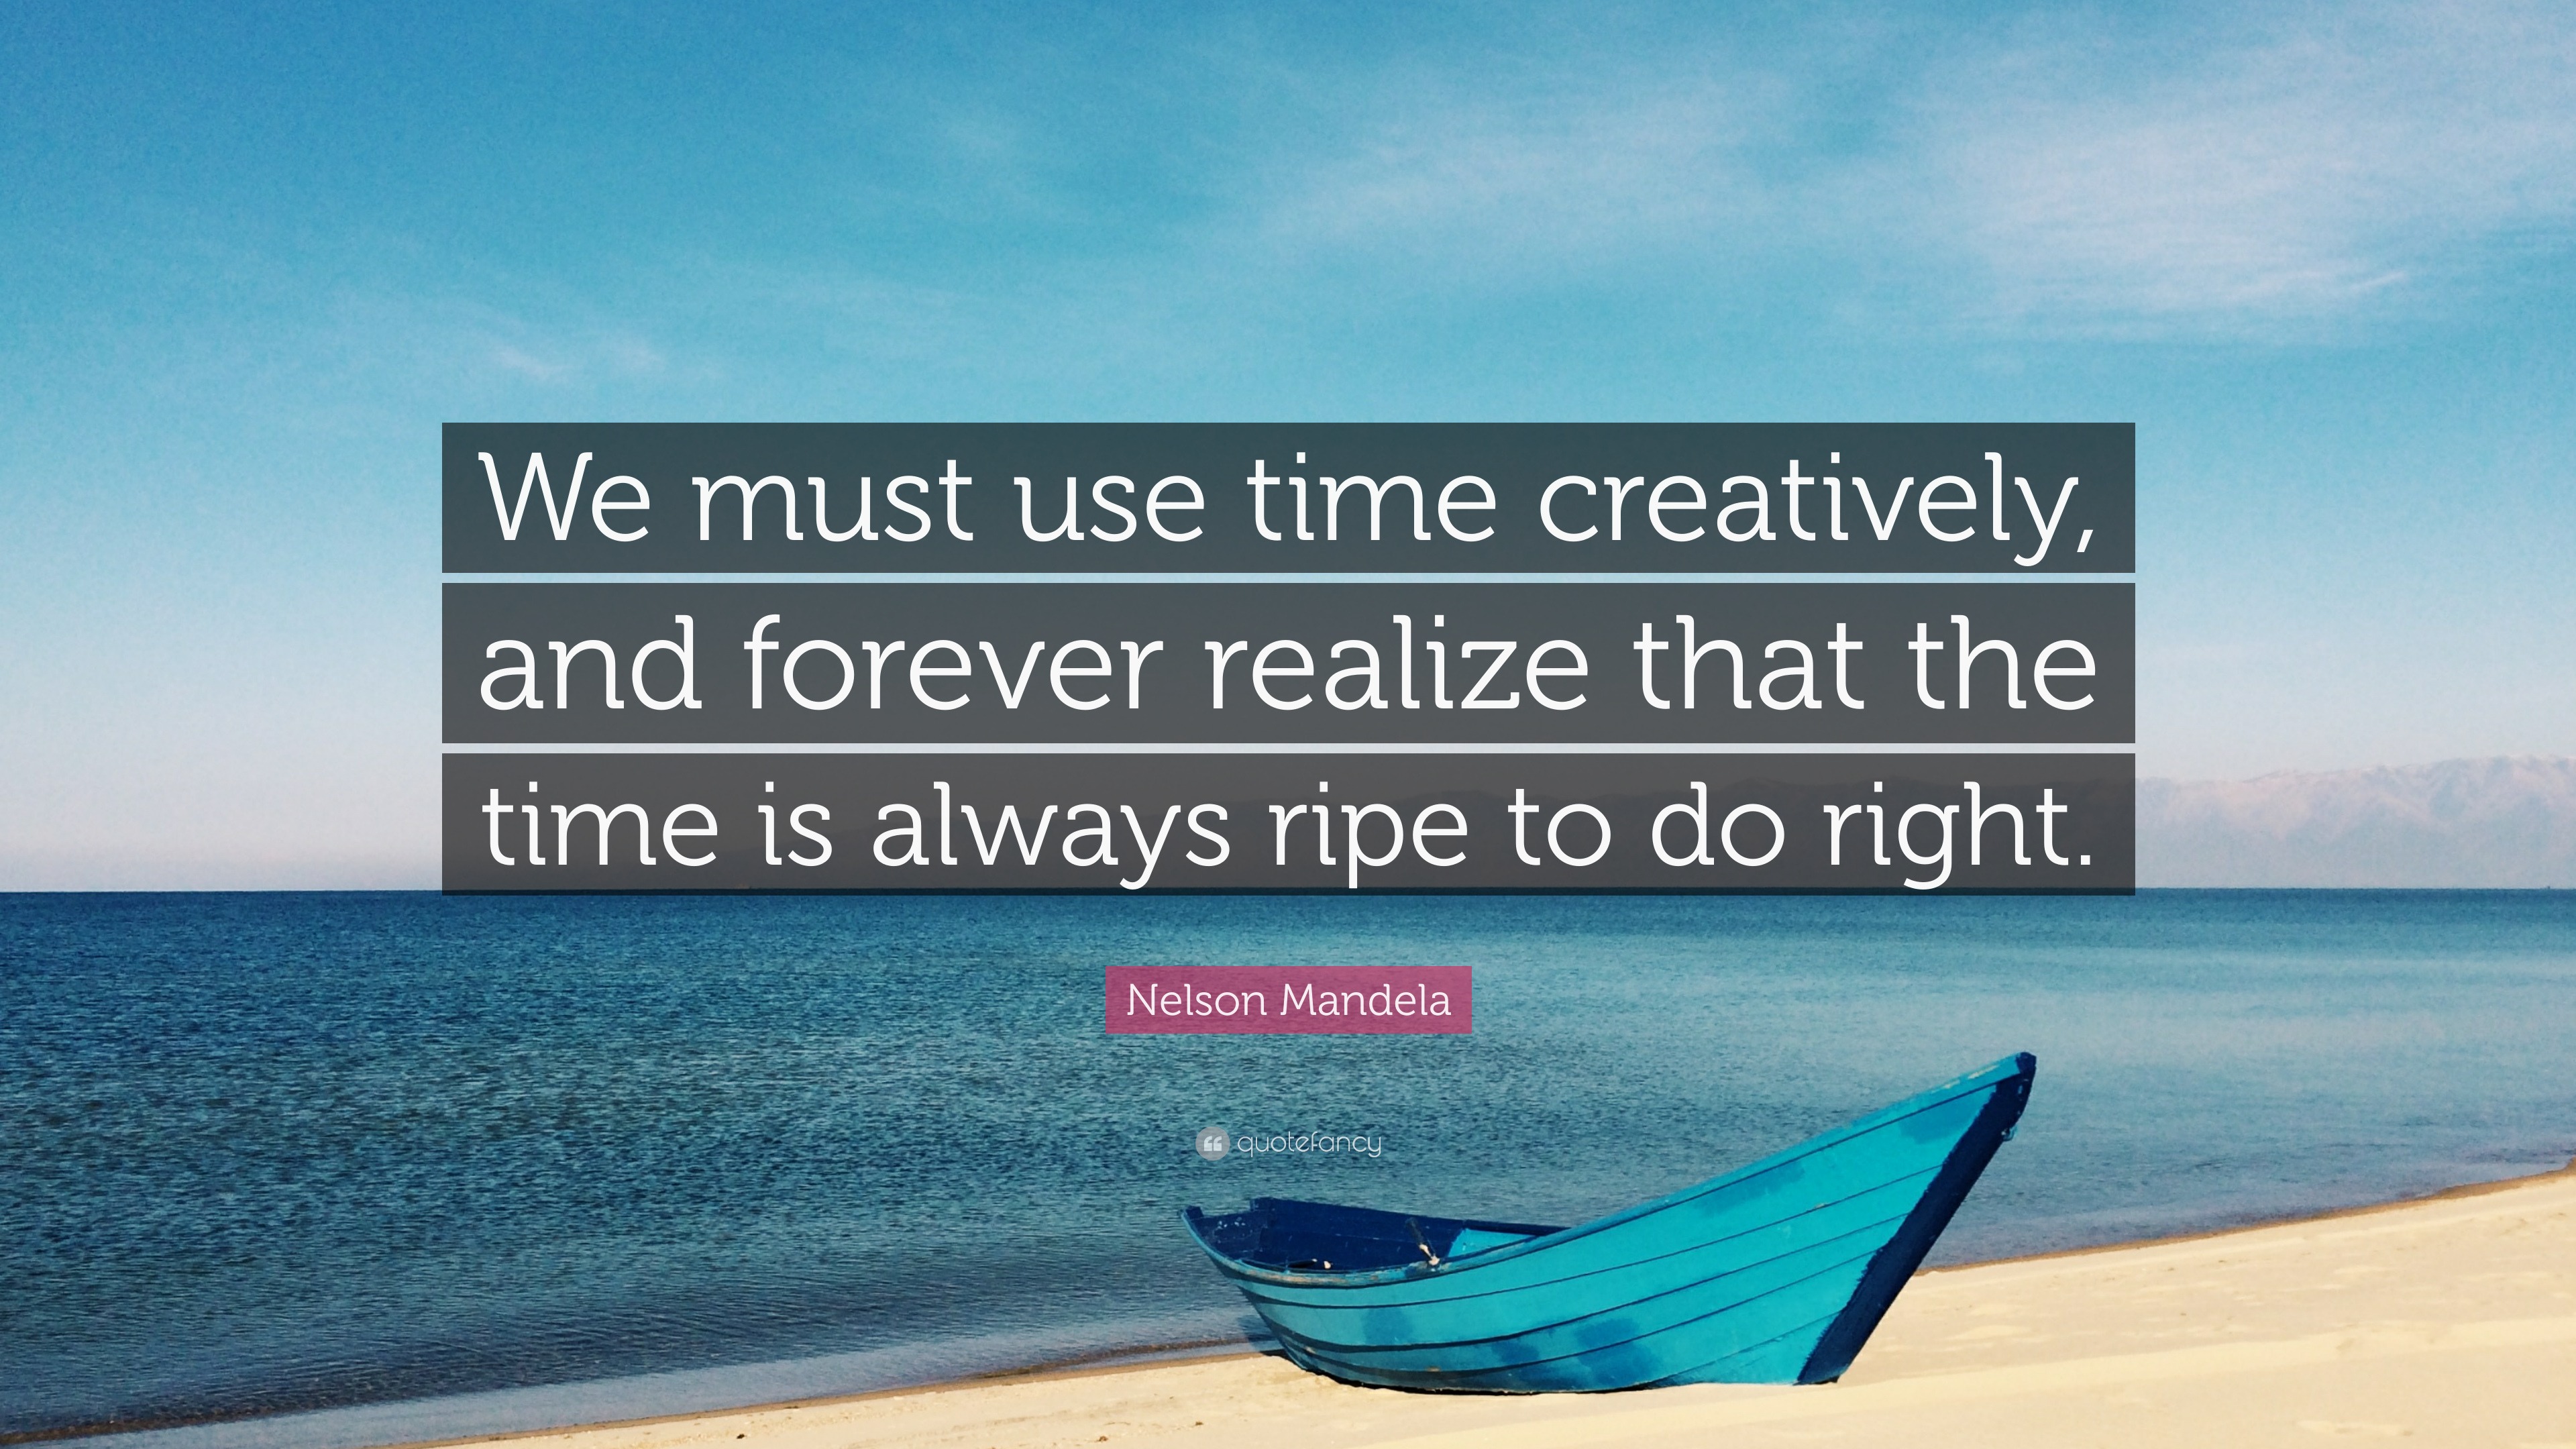 Nelson Mandela Quote: “We must use time creatively, and forever realize